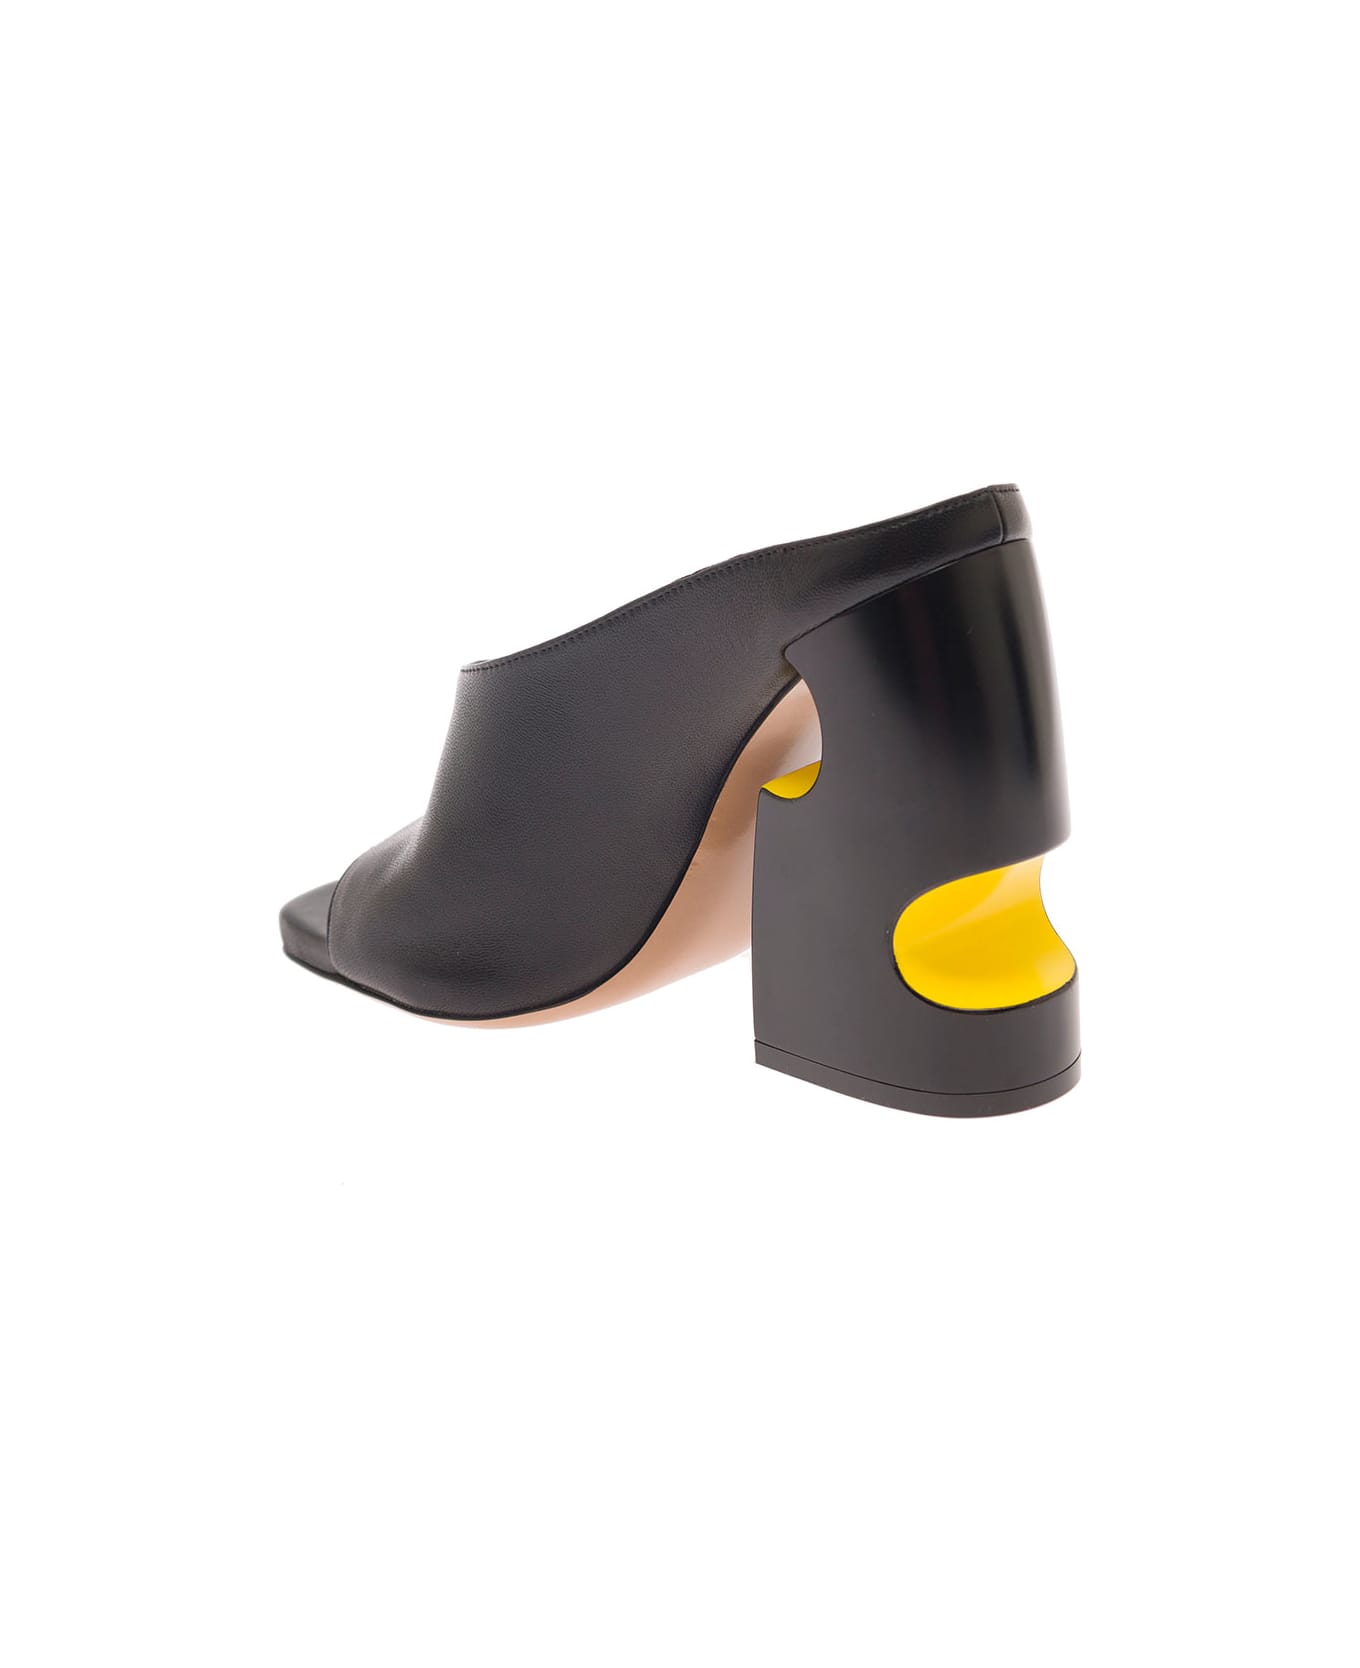 Off-White Pop Meteor Mules In Black Leather Woman - Black